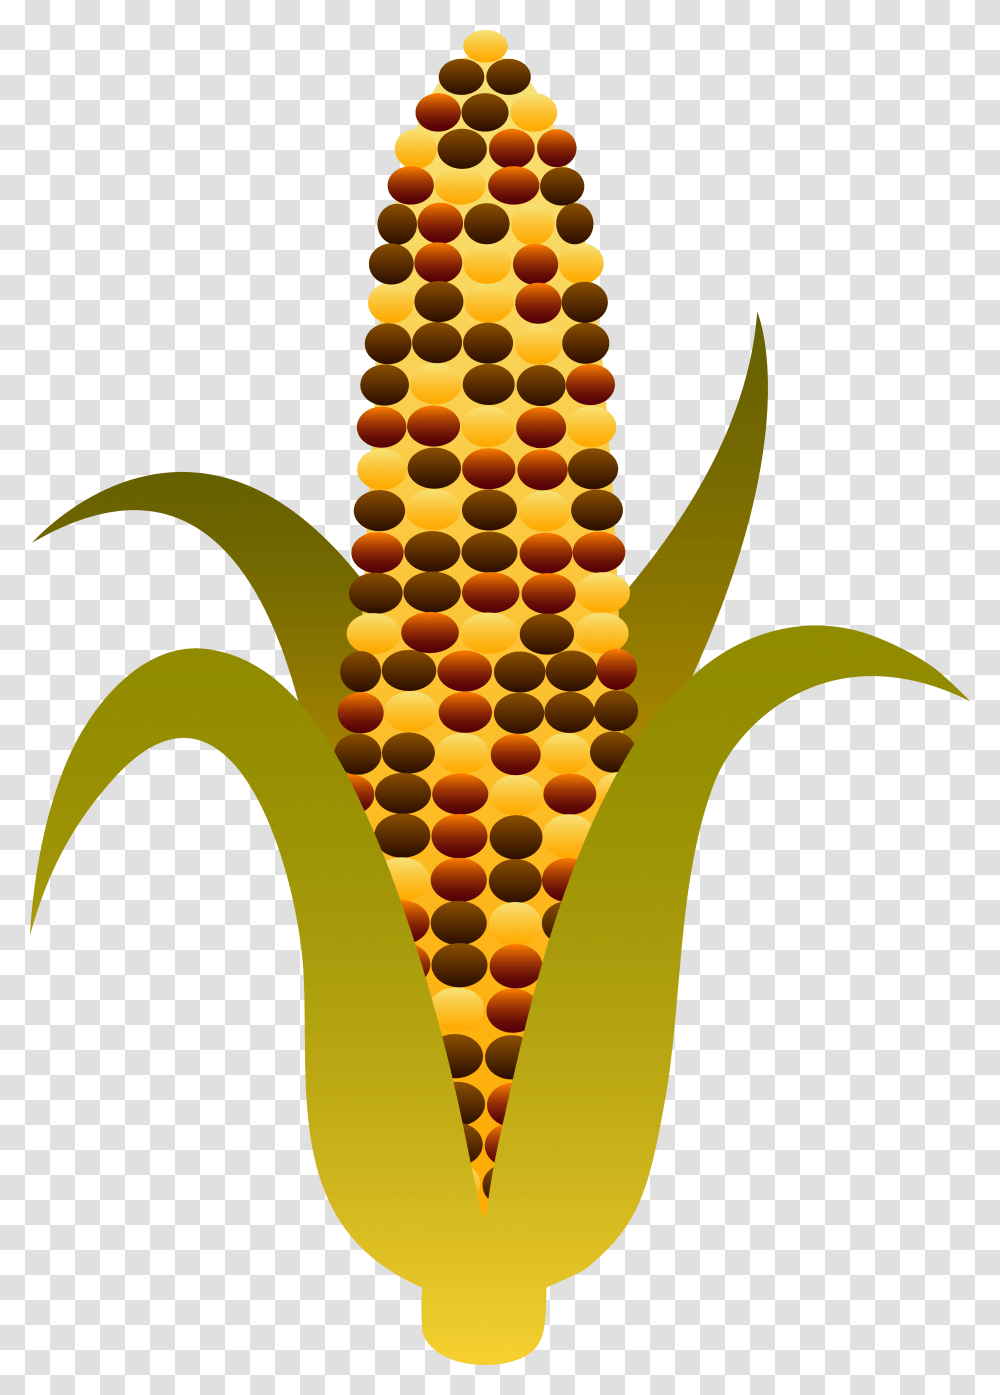 Ear Of Corn Clipart Free Image, Plant, Vegetable, Food Transparent Png